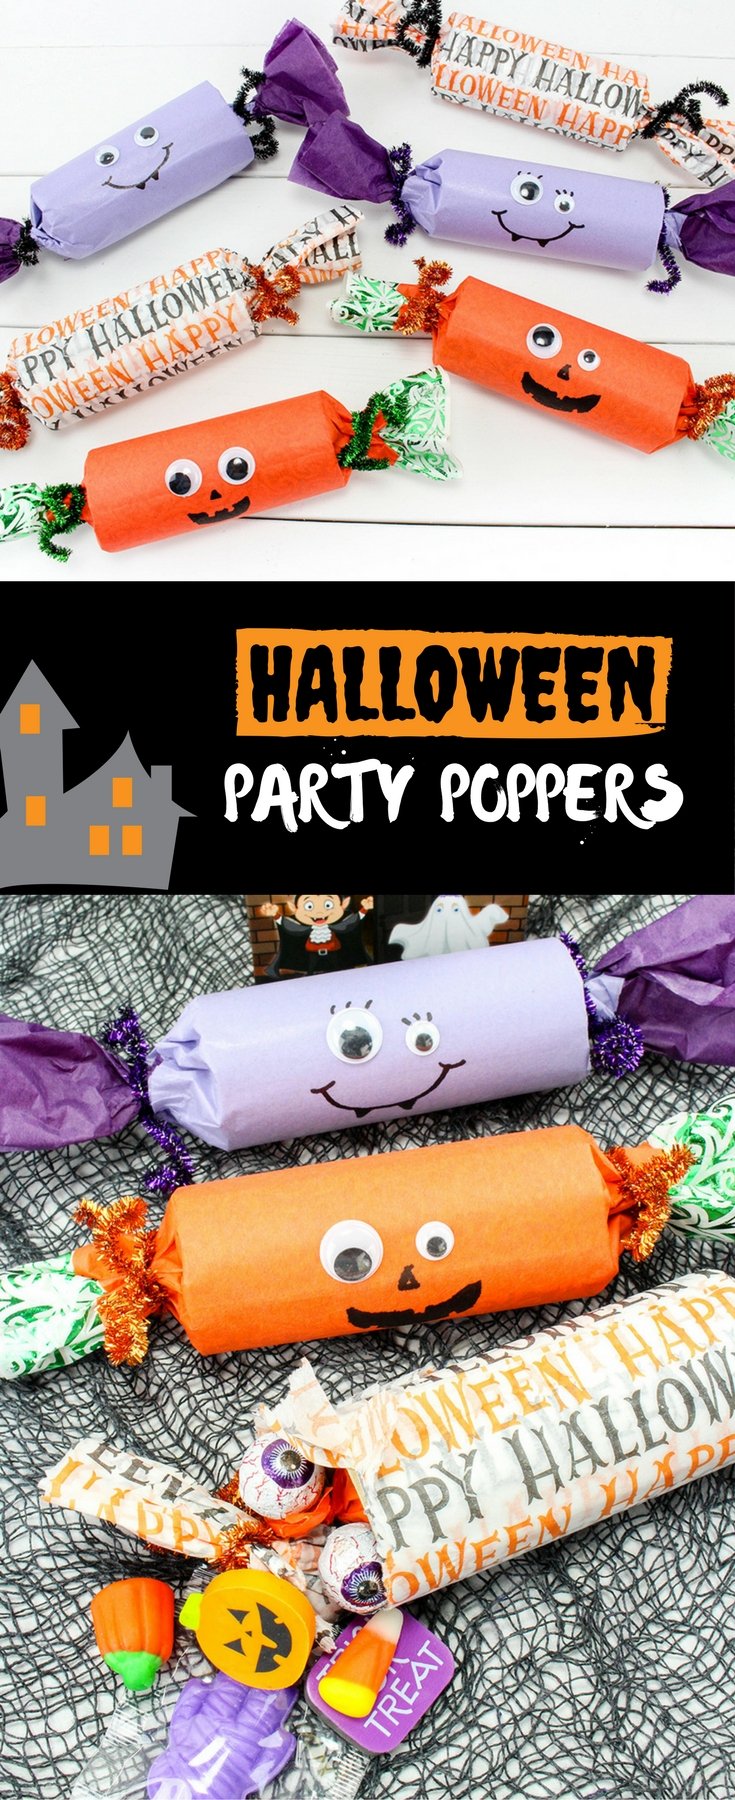 Halloween Party Poppers are a fun Halloween party decoration that your kids will love creating!